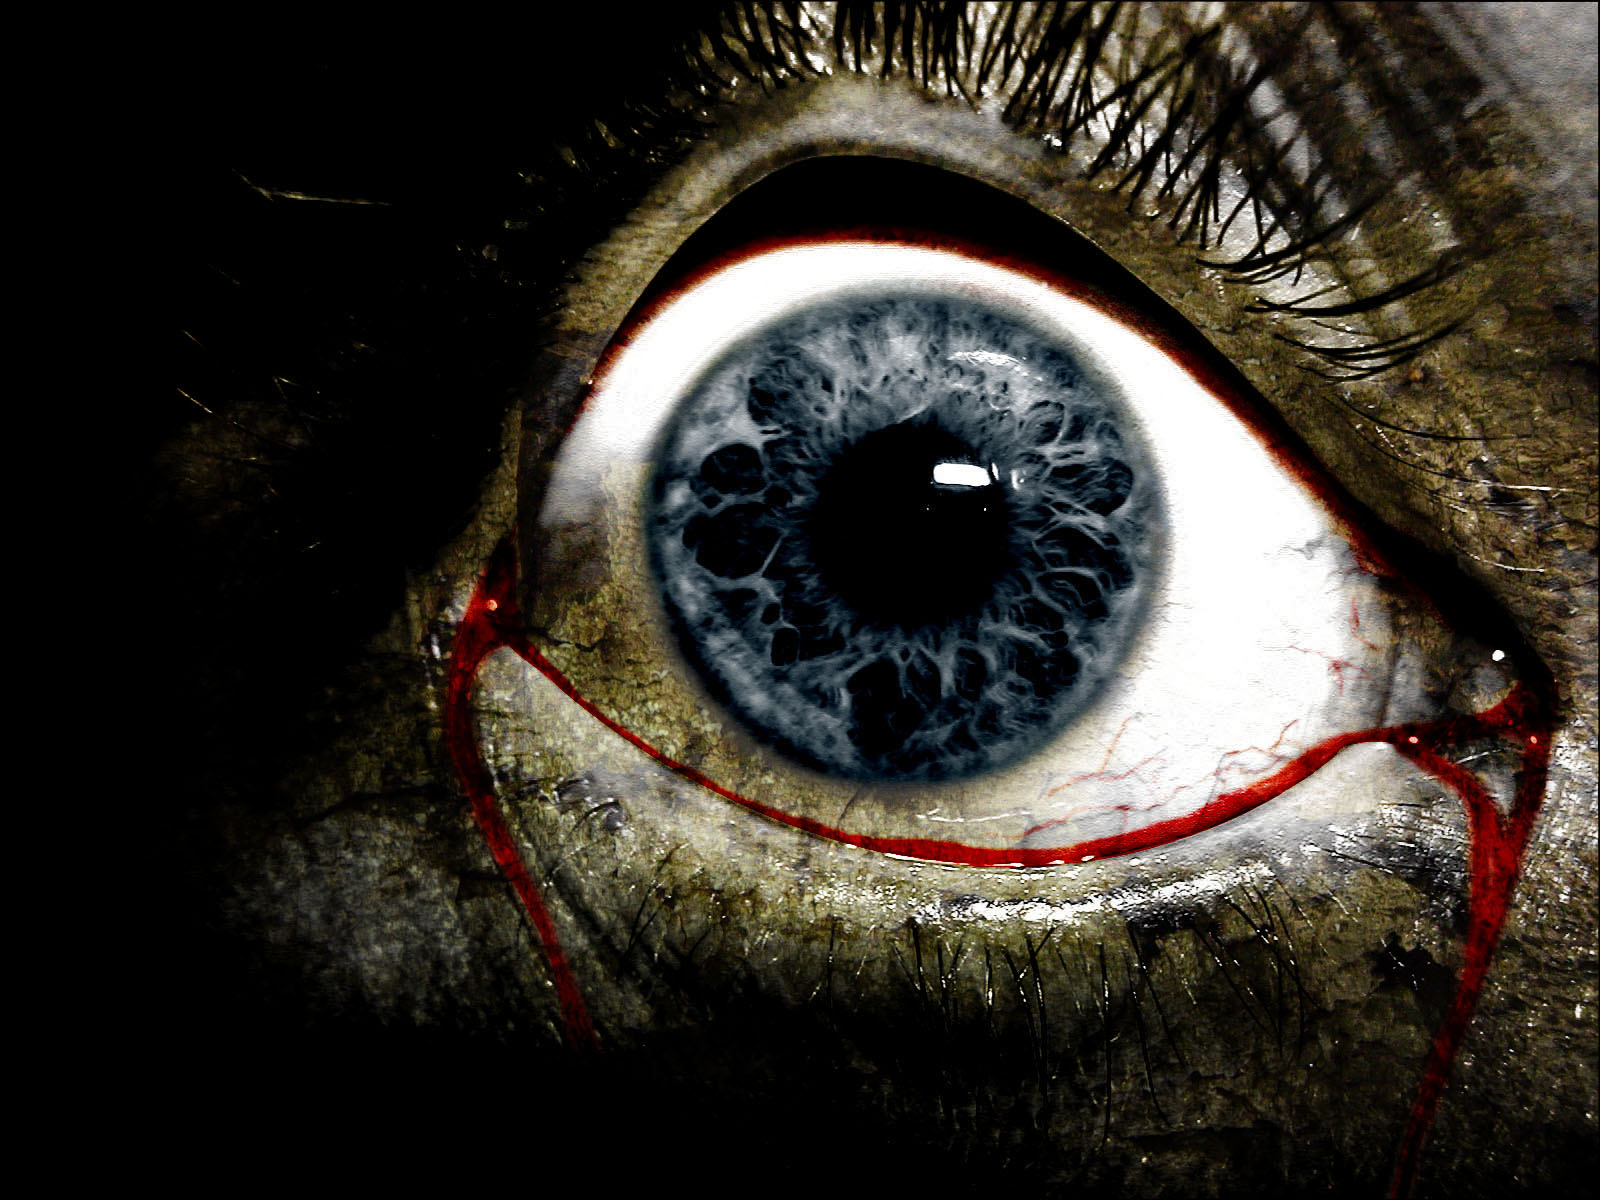  Scary Eye Photography Backgrounds on this Scary Wallpaper Backgrounds